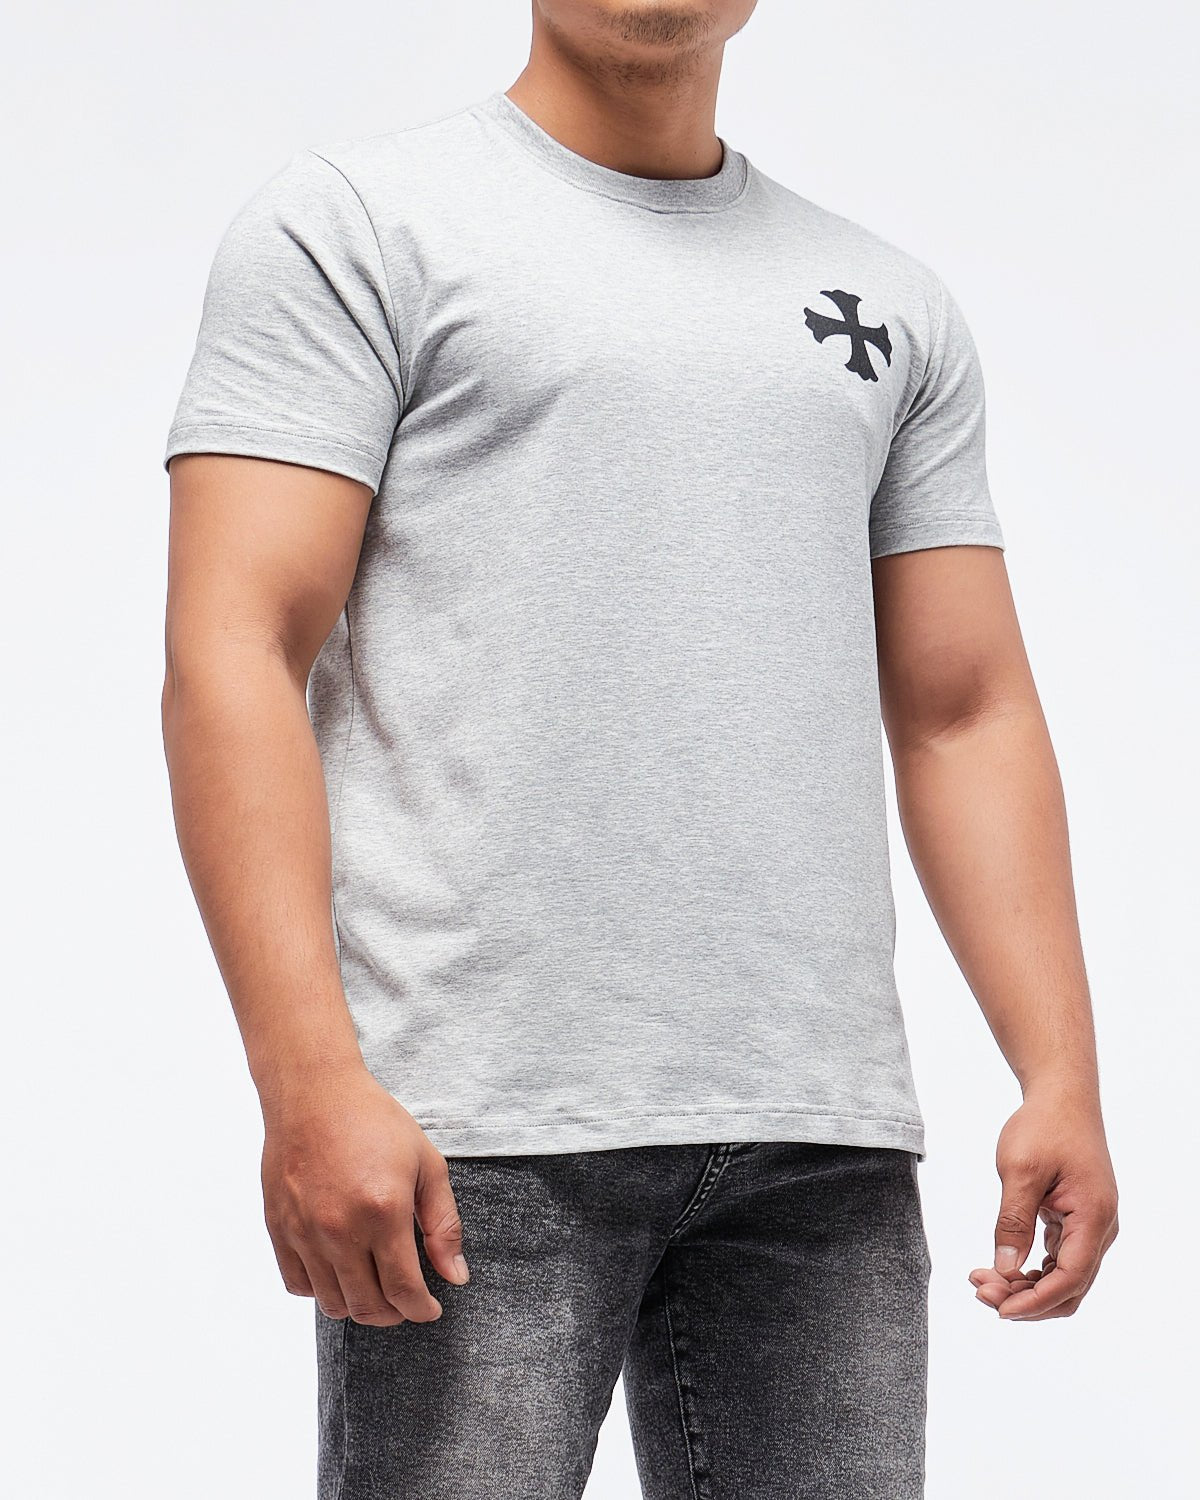 MOI OUTFIT-Cross Back Printed Men T-Shirt 15.90